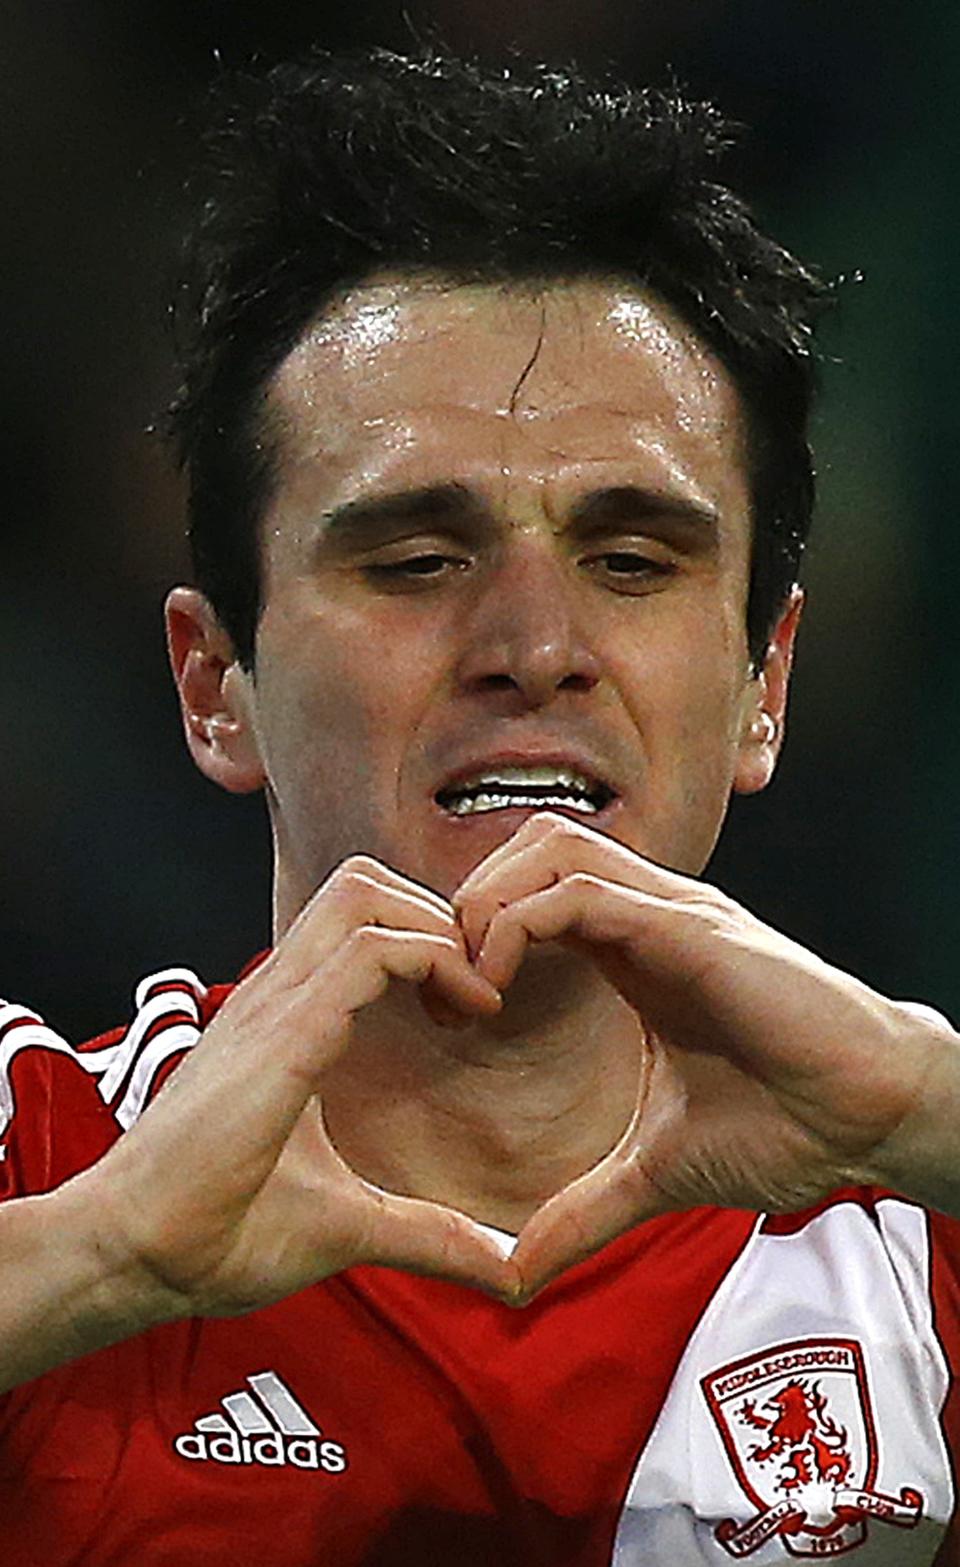 Middlesbrough's Kike celebrates his goal against Manchester City during their English FA Cup 4th round soccer match at the Etihad Stadium in Manchester, northern England, January 24, 2015. REUTERS/Darren Staples (BRITAIN - Tags: SPORT SOCCER)